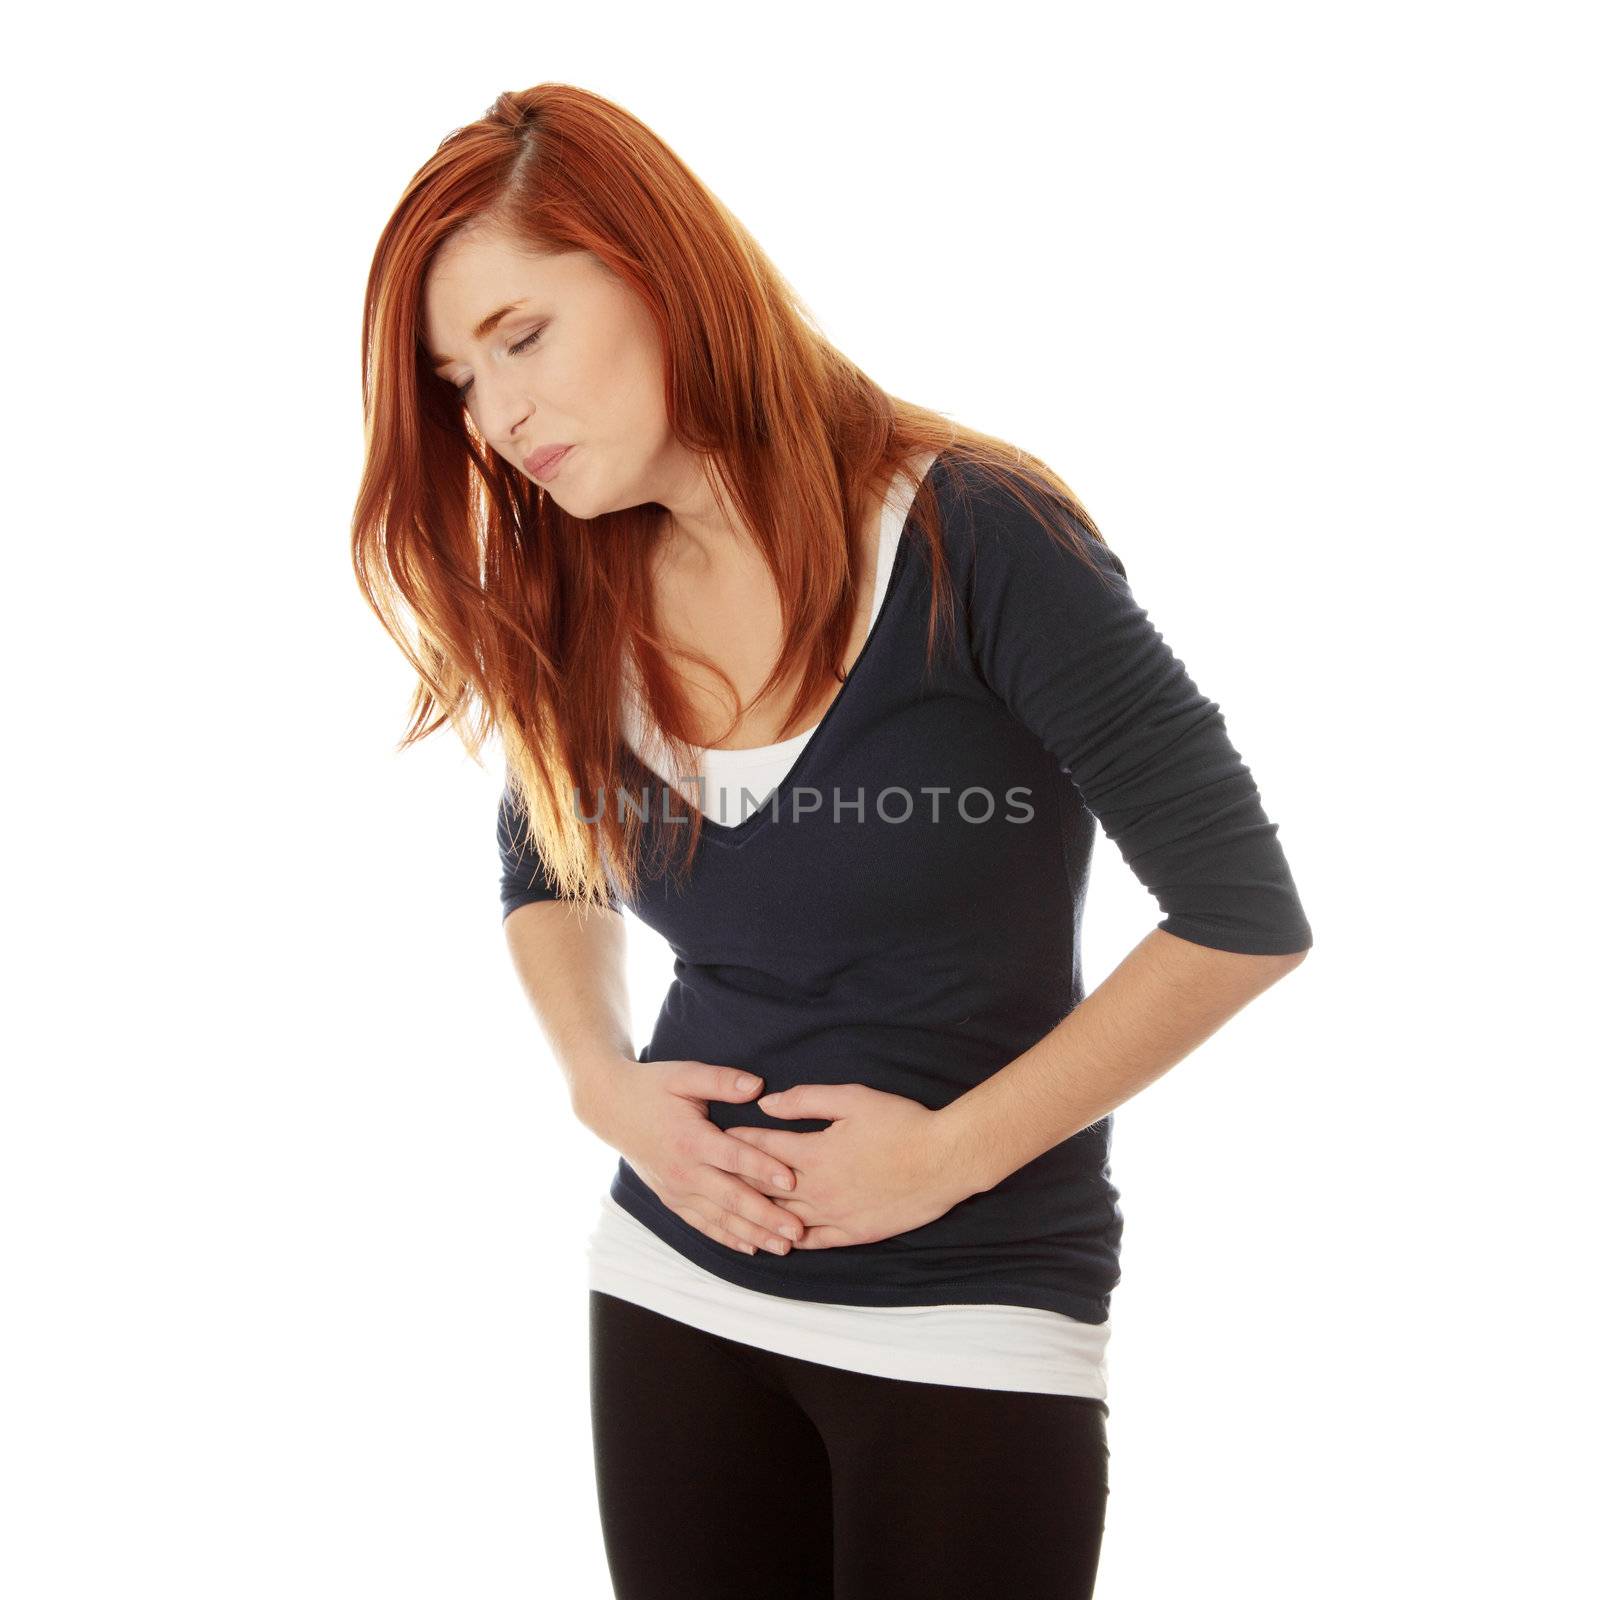 Woman with stomach issues,isolated on white